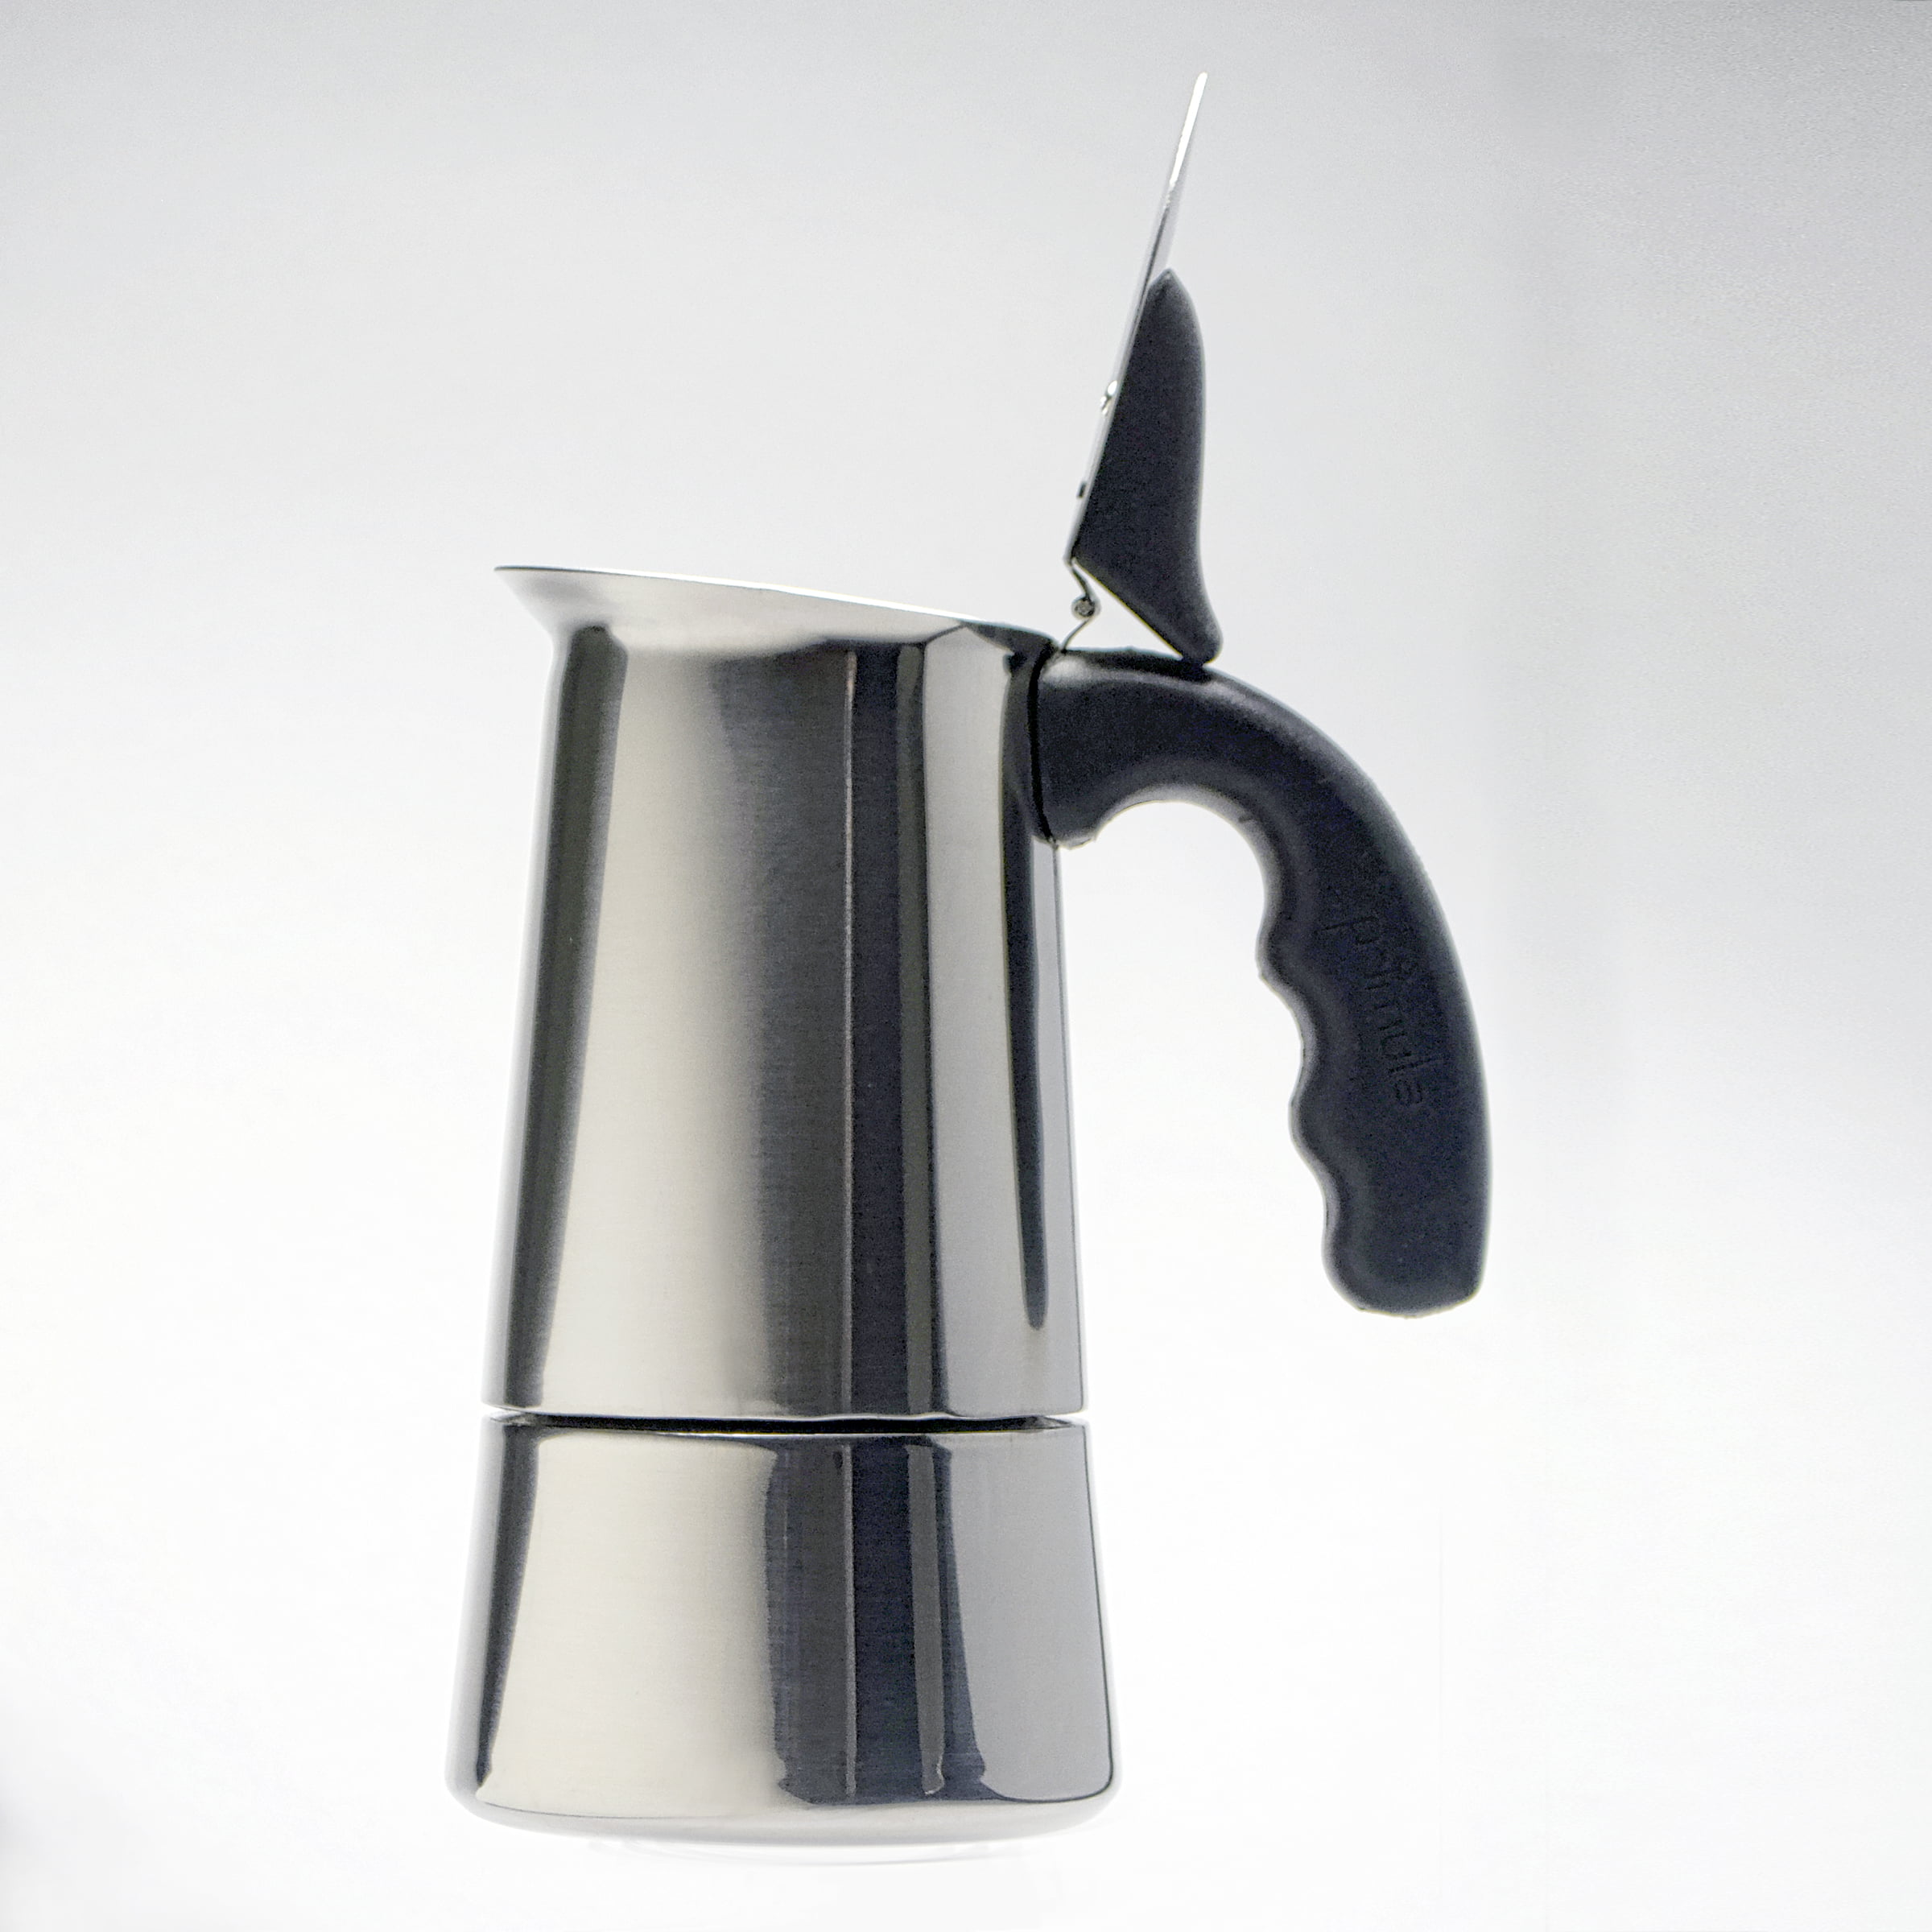 Italmax Espresso Maker, Stainless Steel, 4 Cup